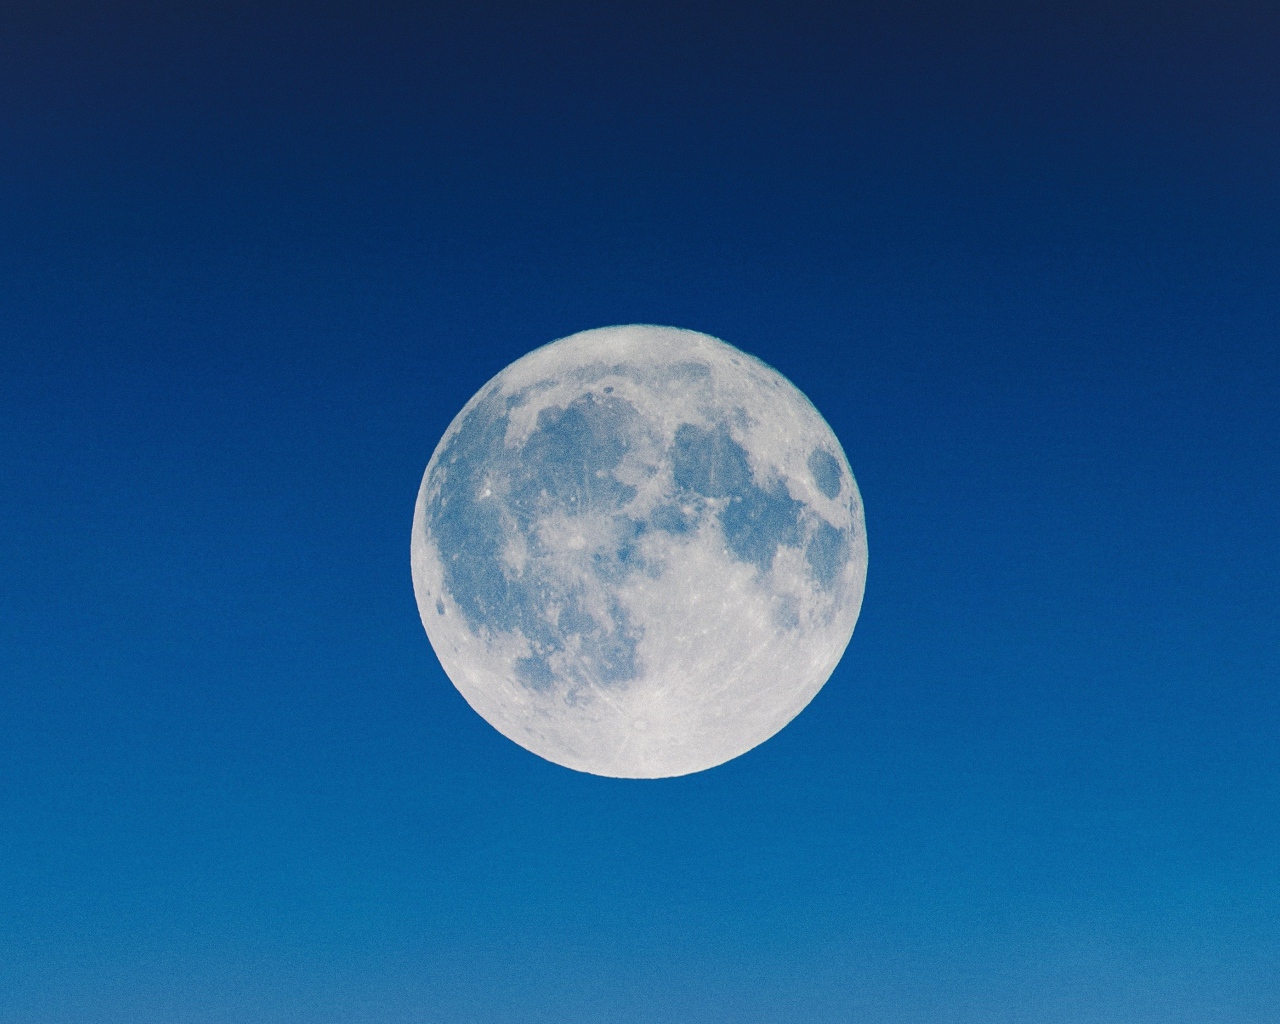 Big white moon in a blue sky